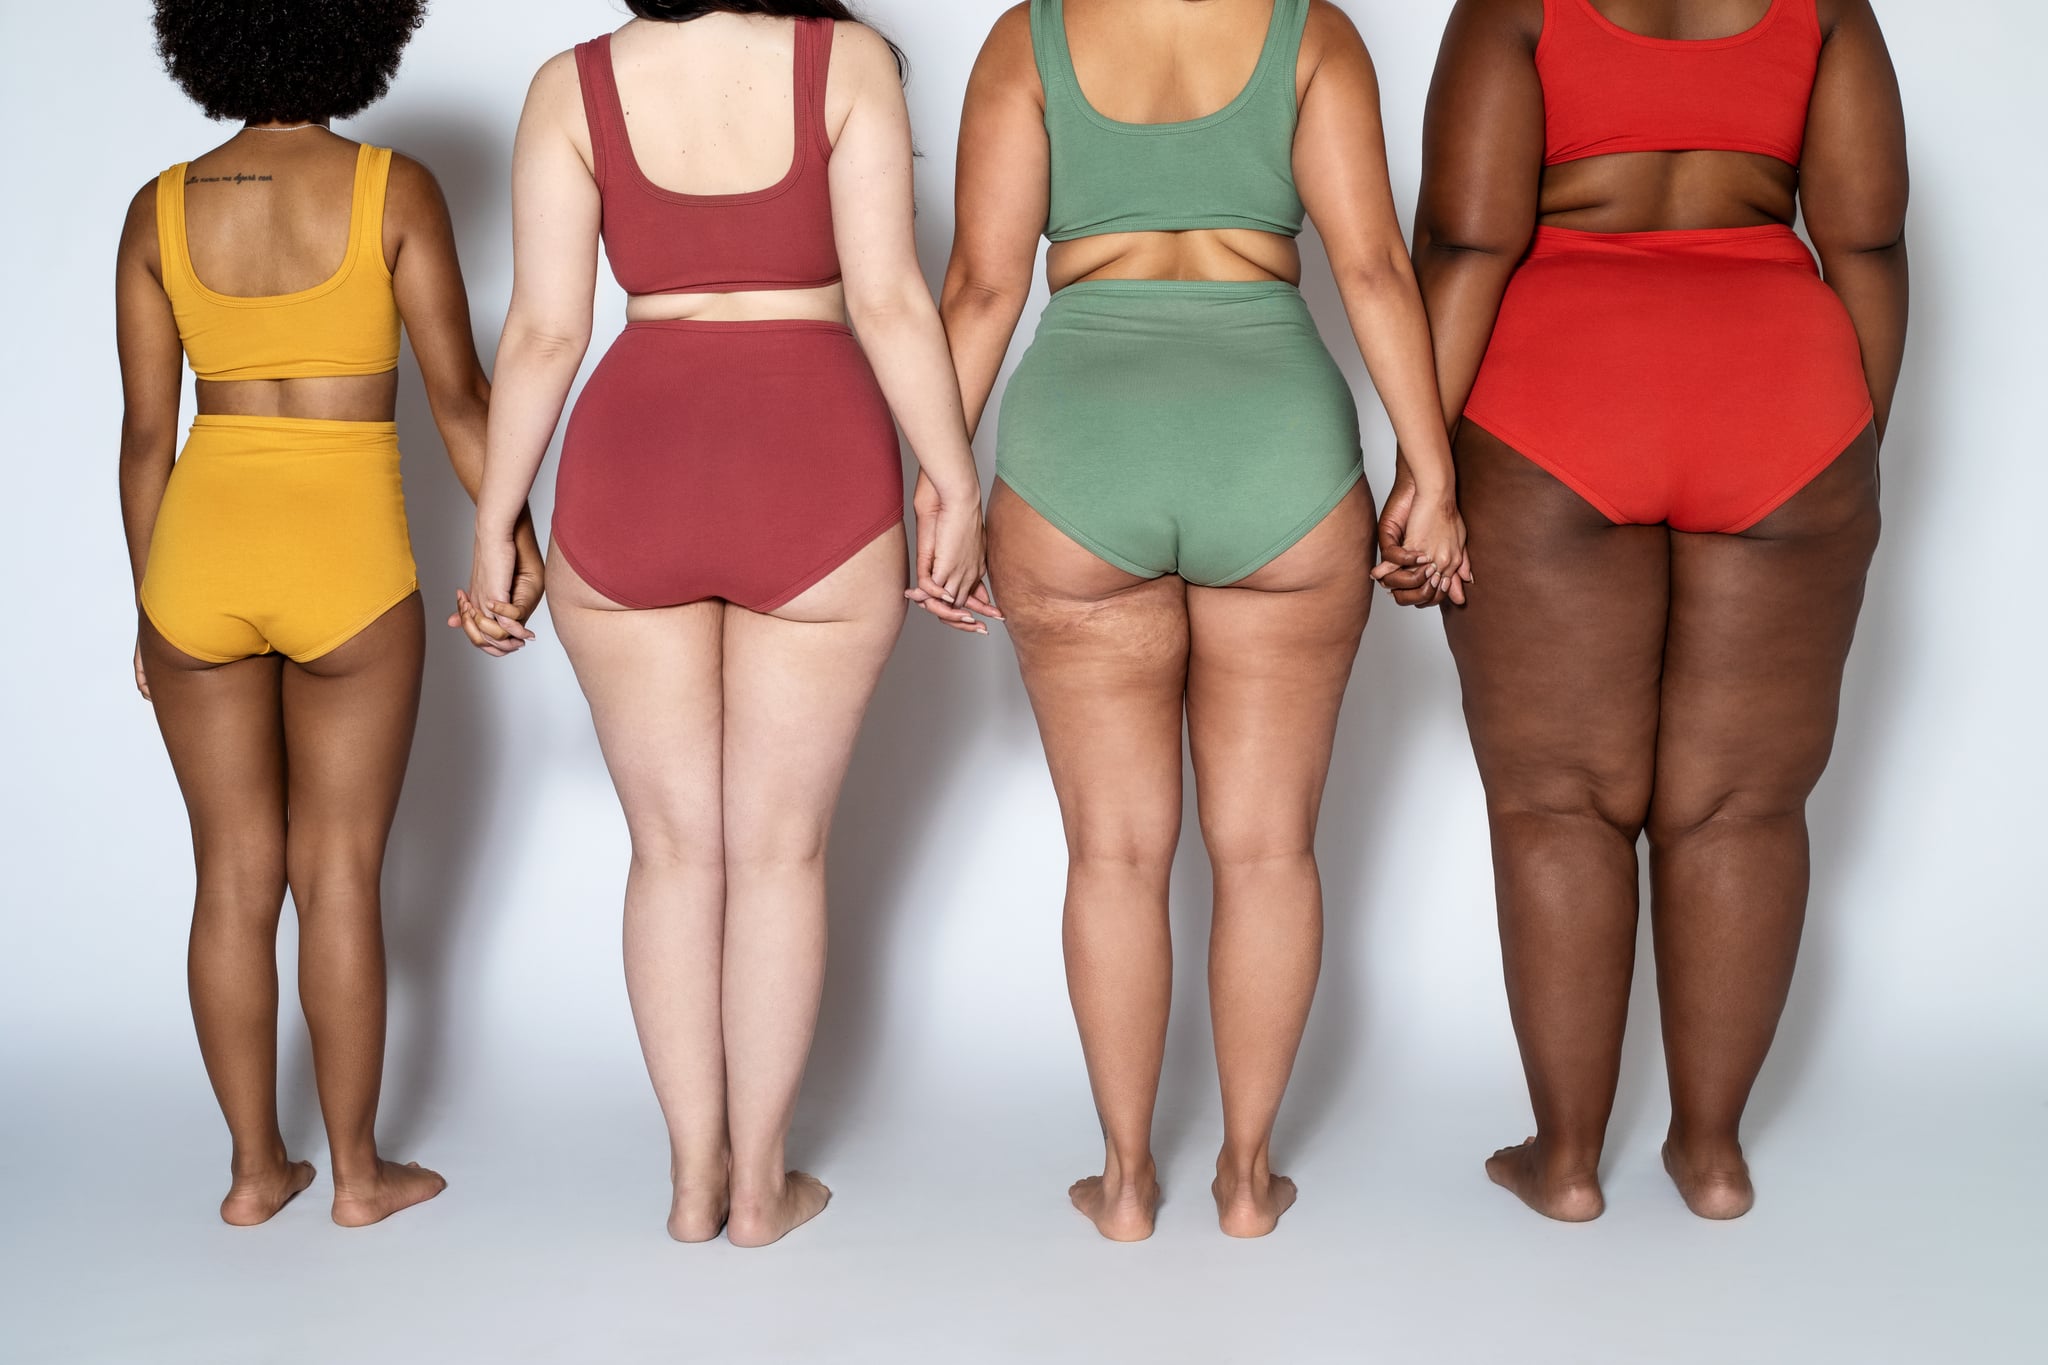 Cellulite on women with different body types.